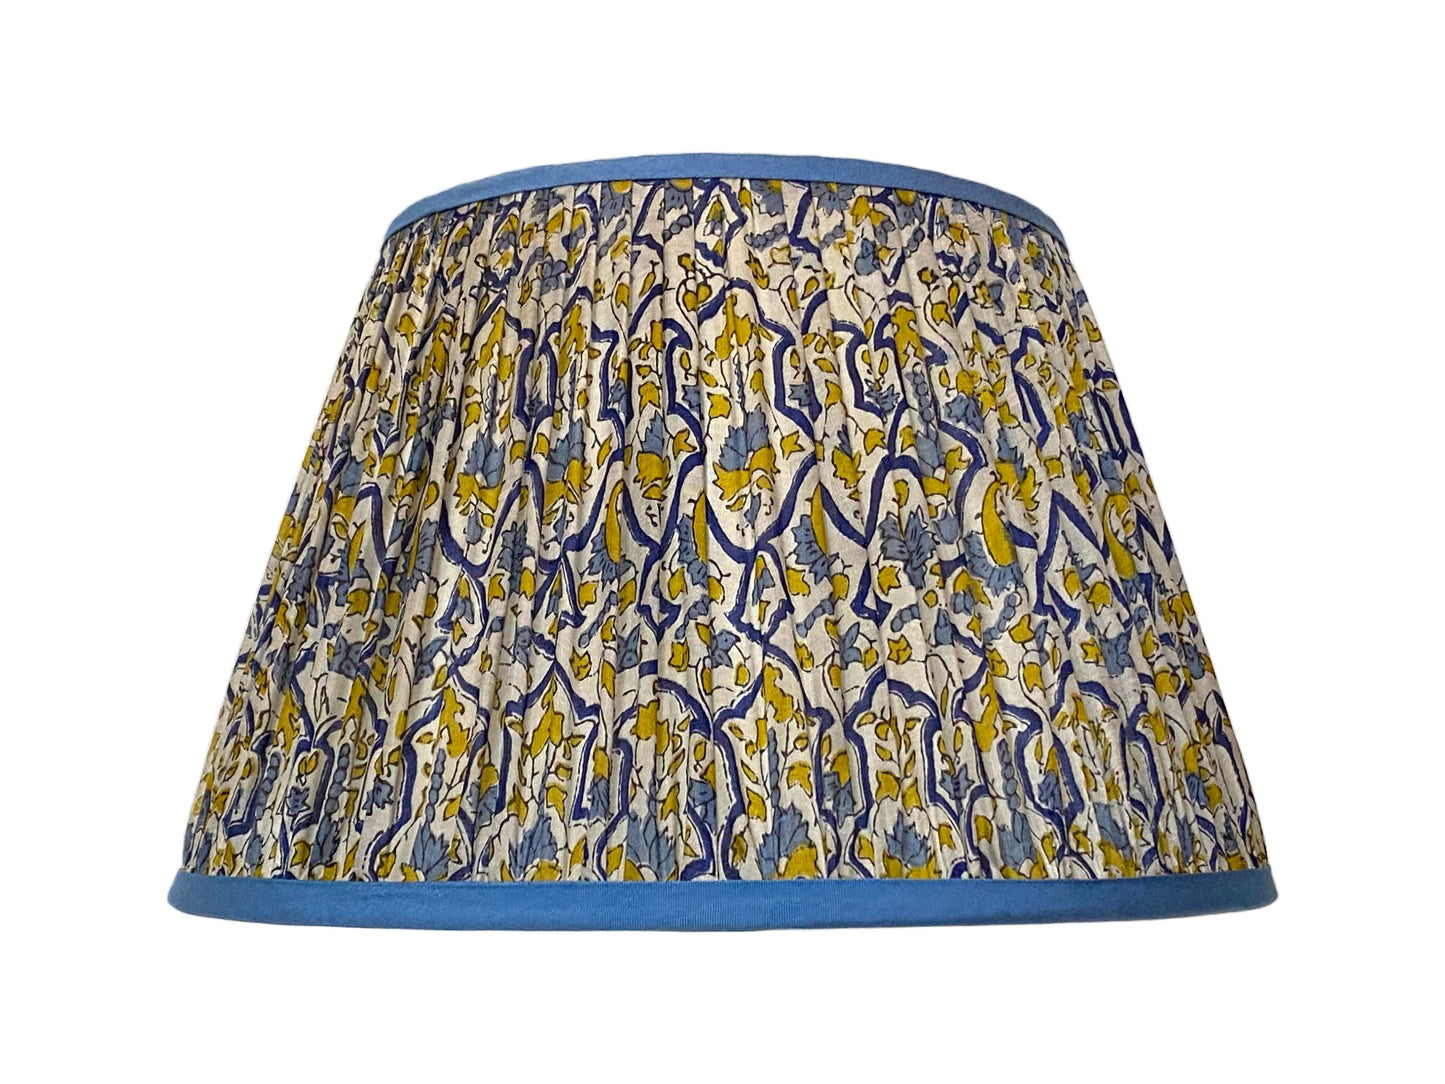 Blue and yellow silk lampshade 35cm